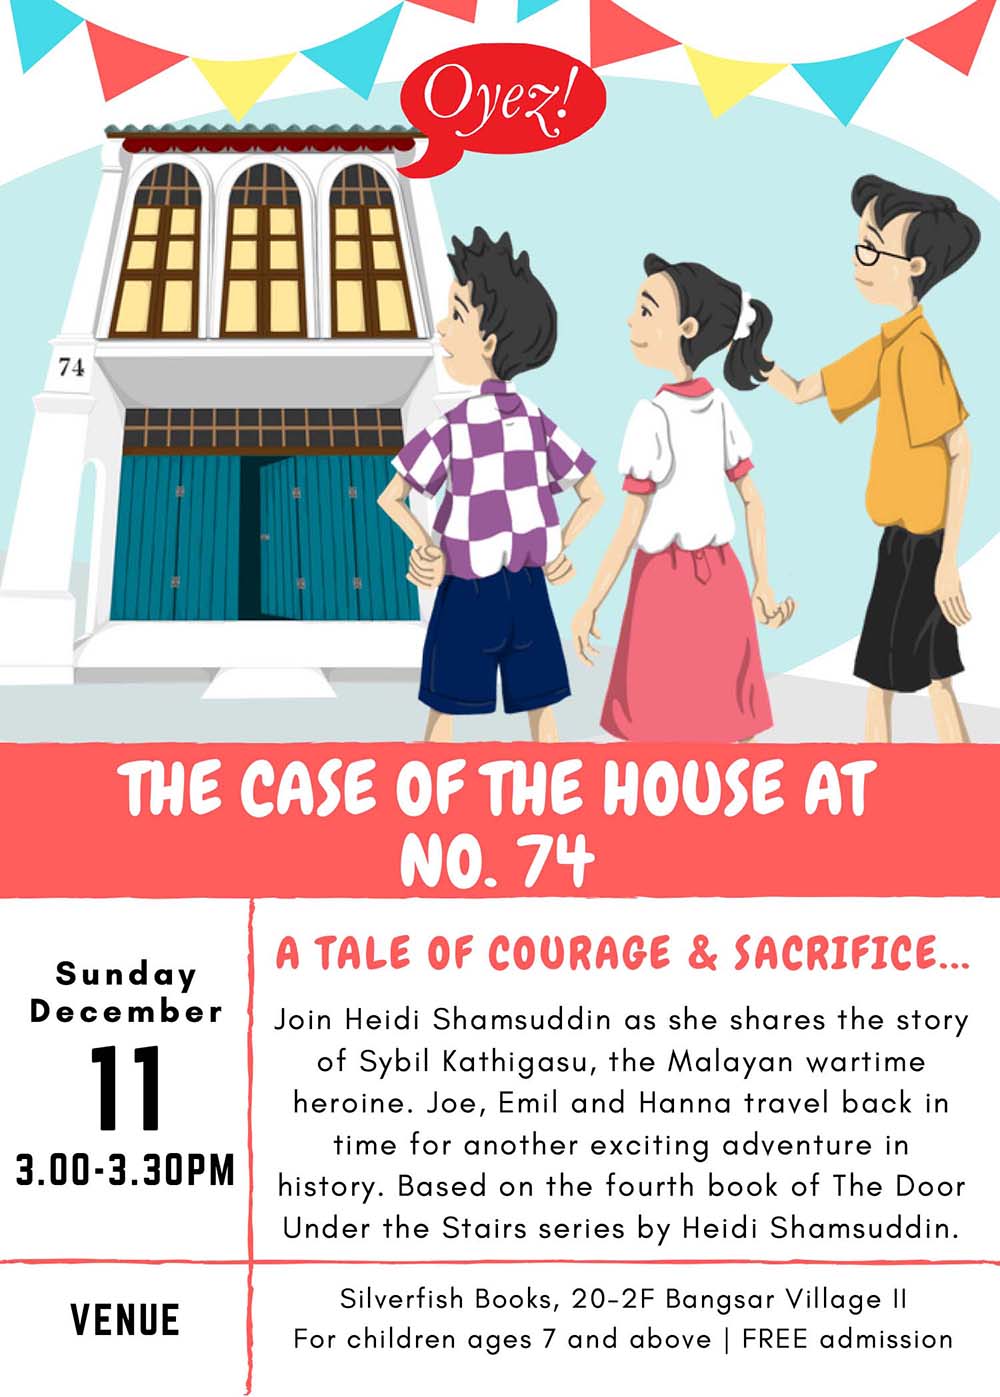 The Case of The House At No. 74 - storytime based on children's chapter book by Heidi Shamsuddin, illustrated by Lim Lay Koon